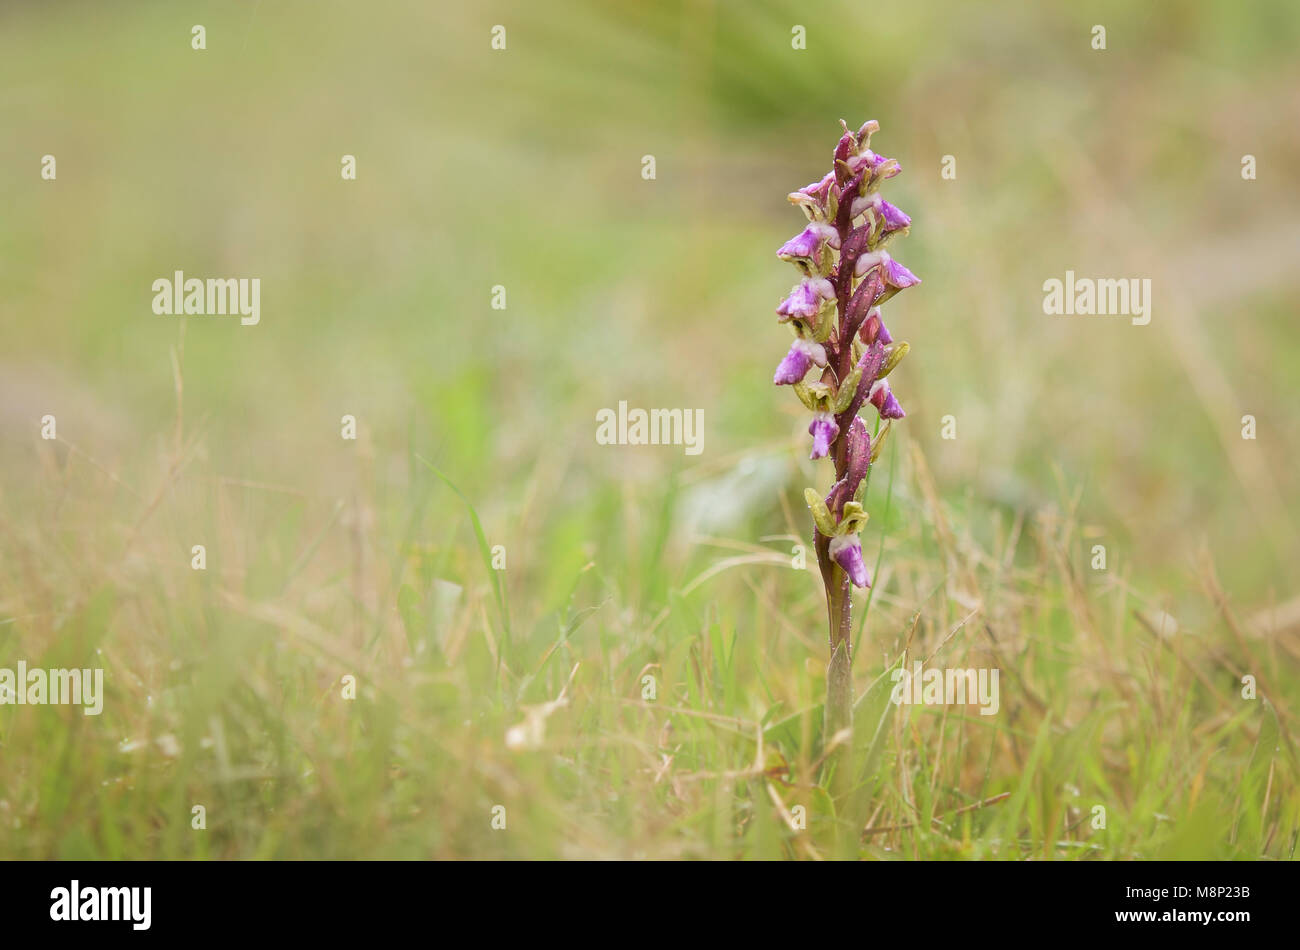 Fan-lipped Orchid, Orchis saccata also known as Orchis collina, wild orchid in Andalusia, Southern Spain Stock Photo